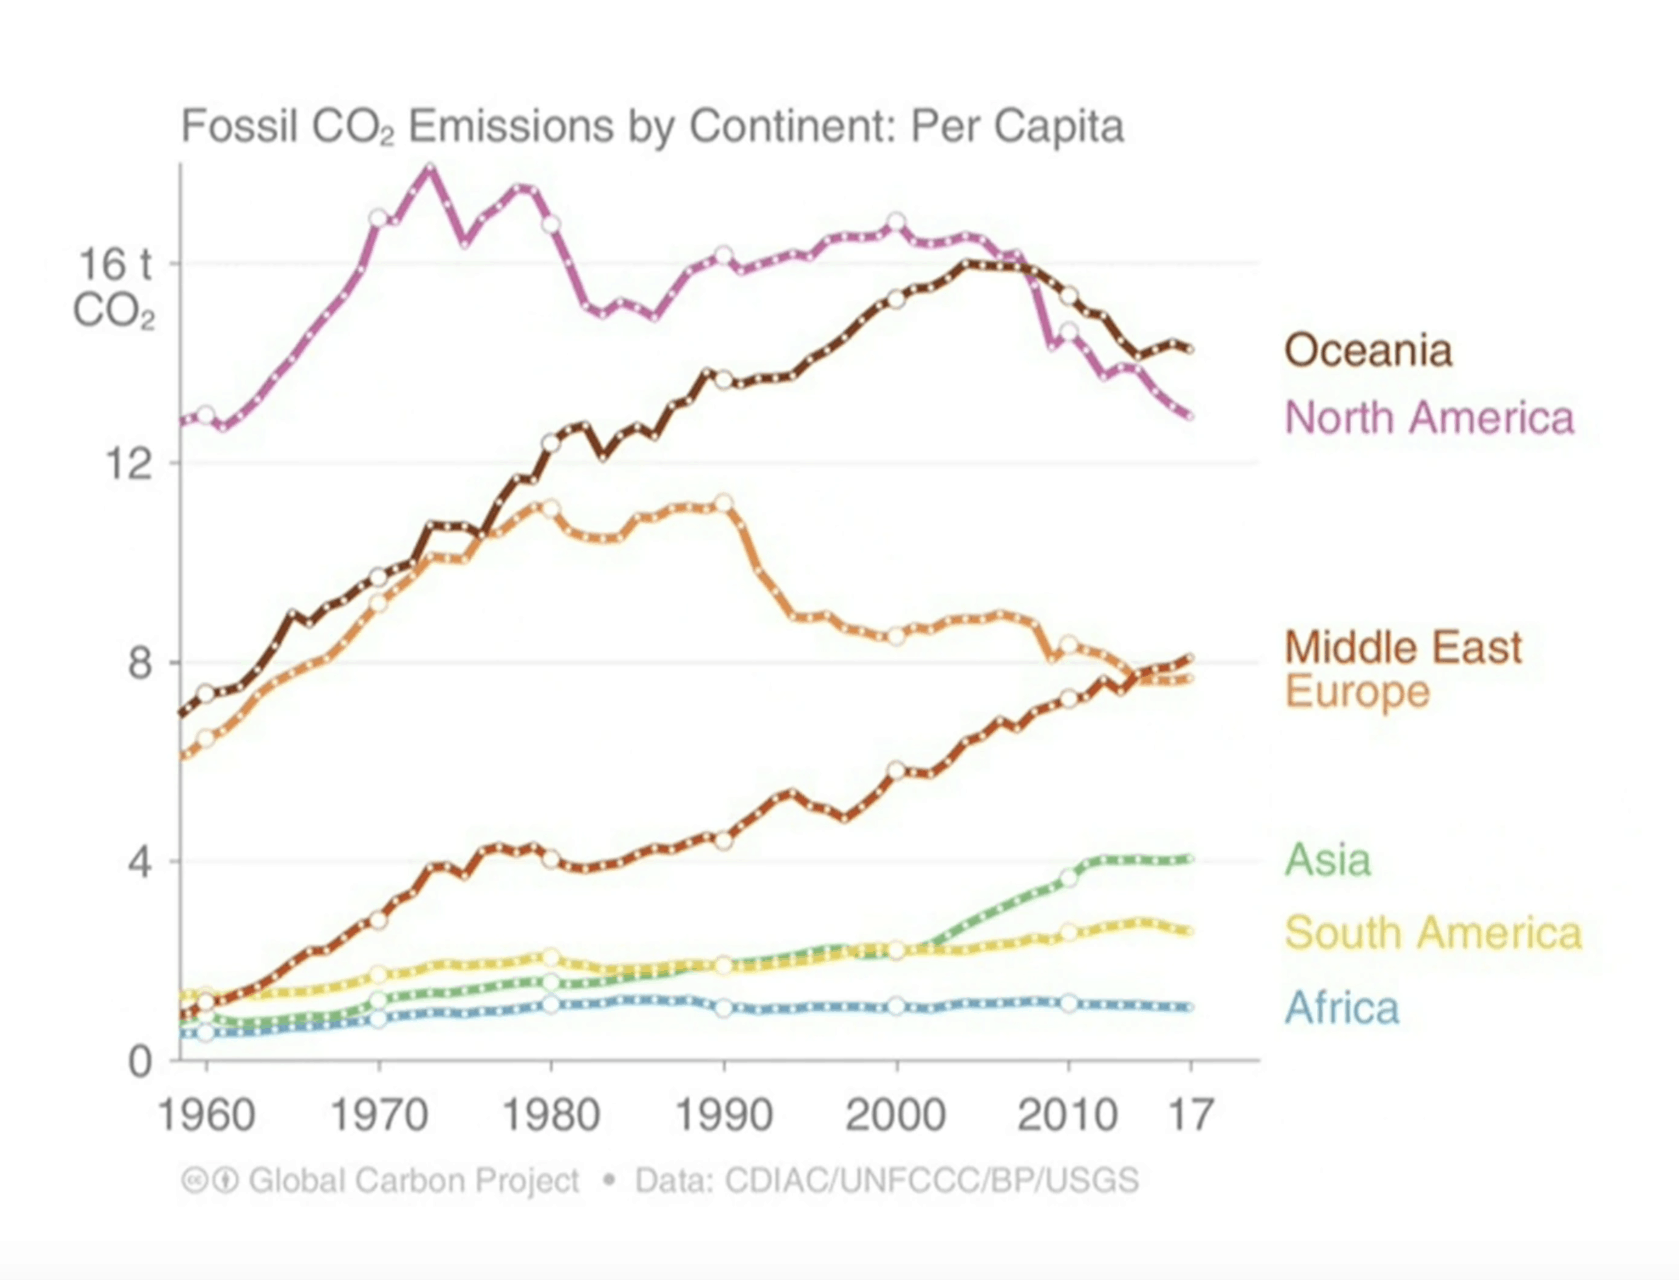 Fossil CO2 Emissions by Continent per capita